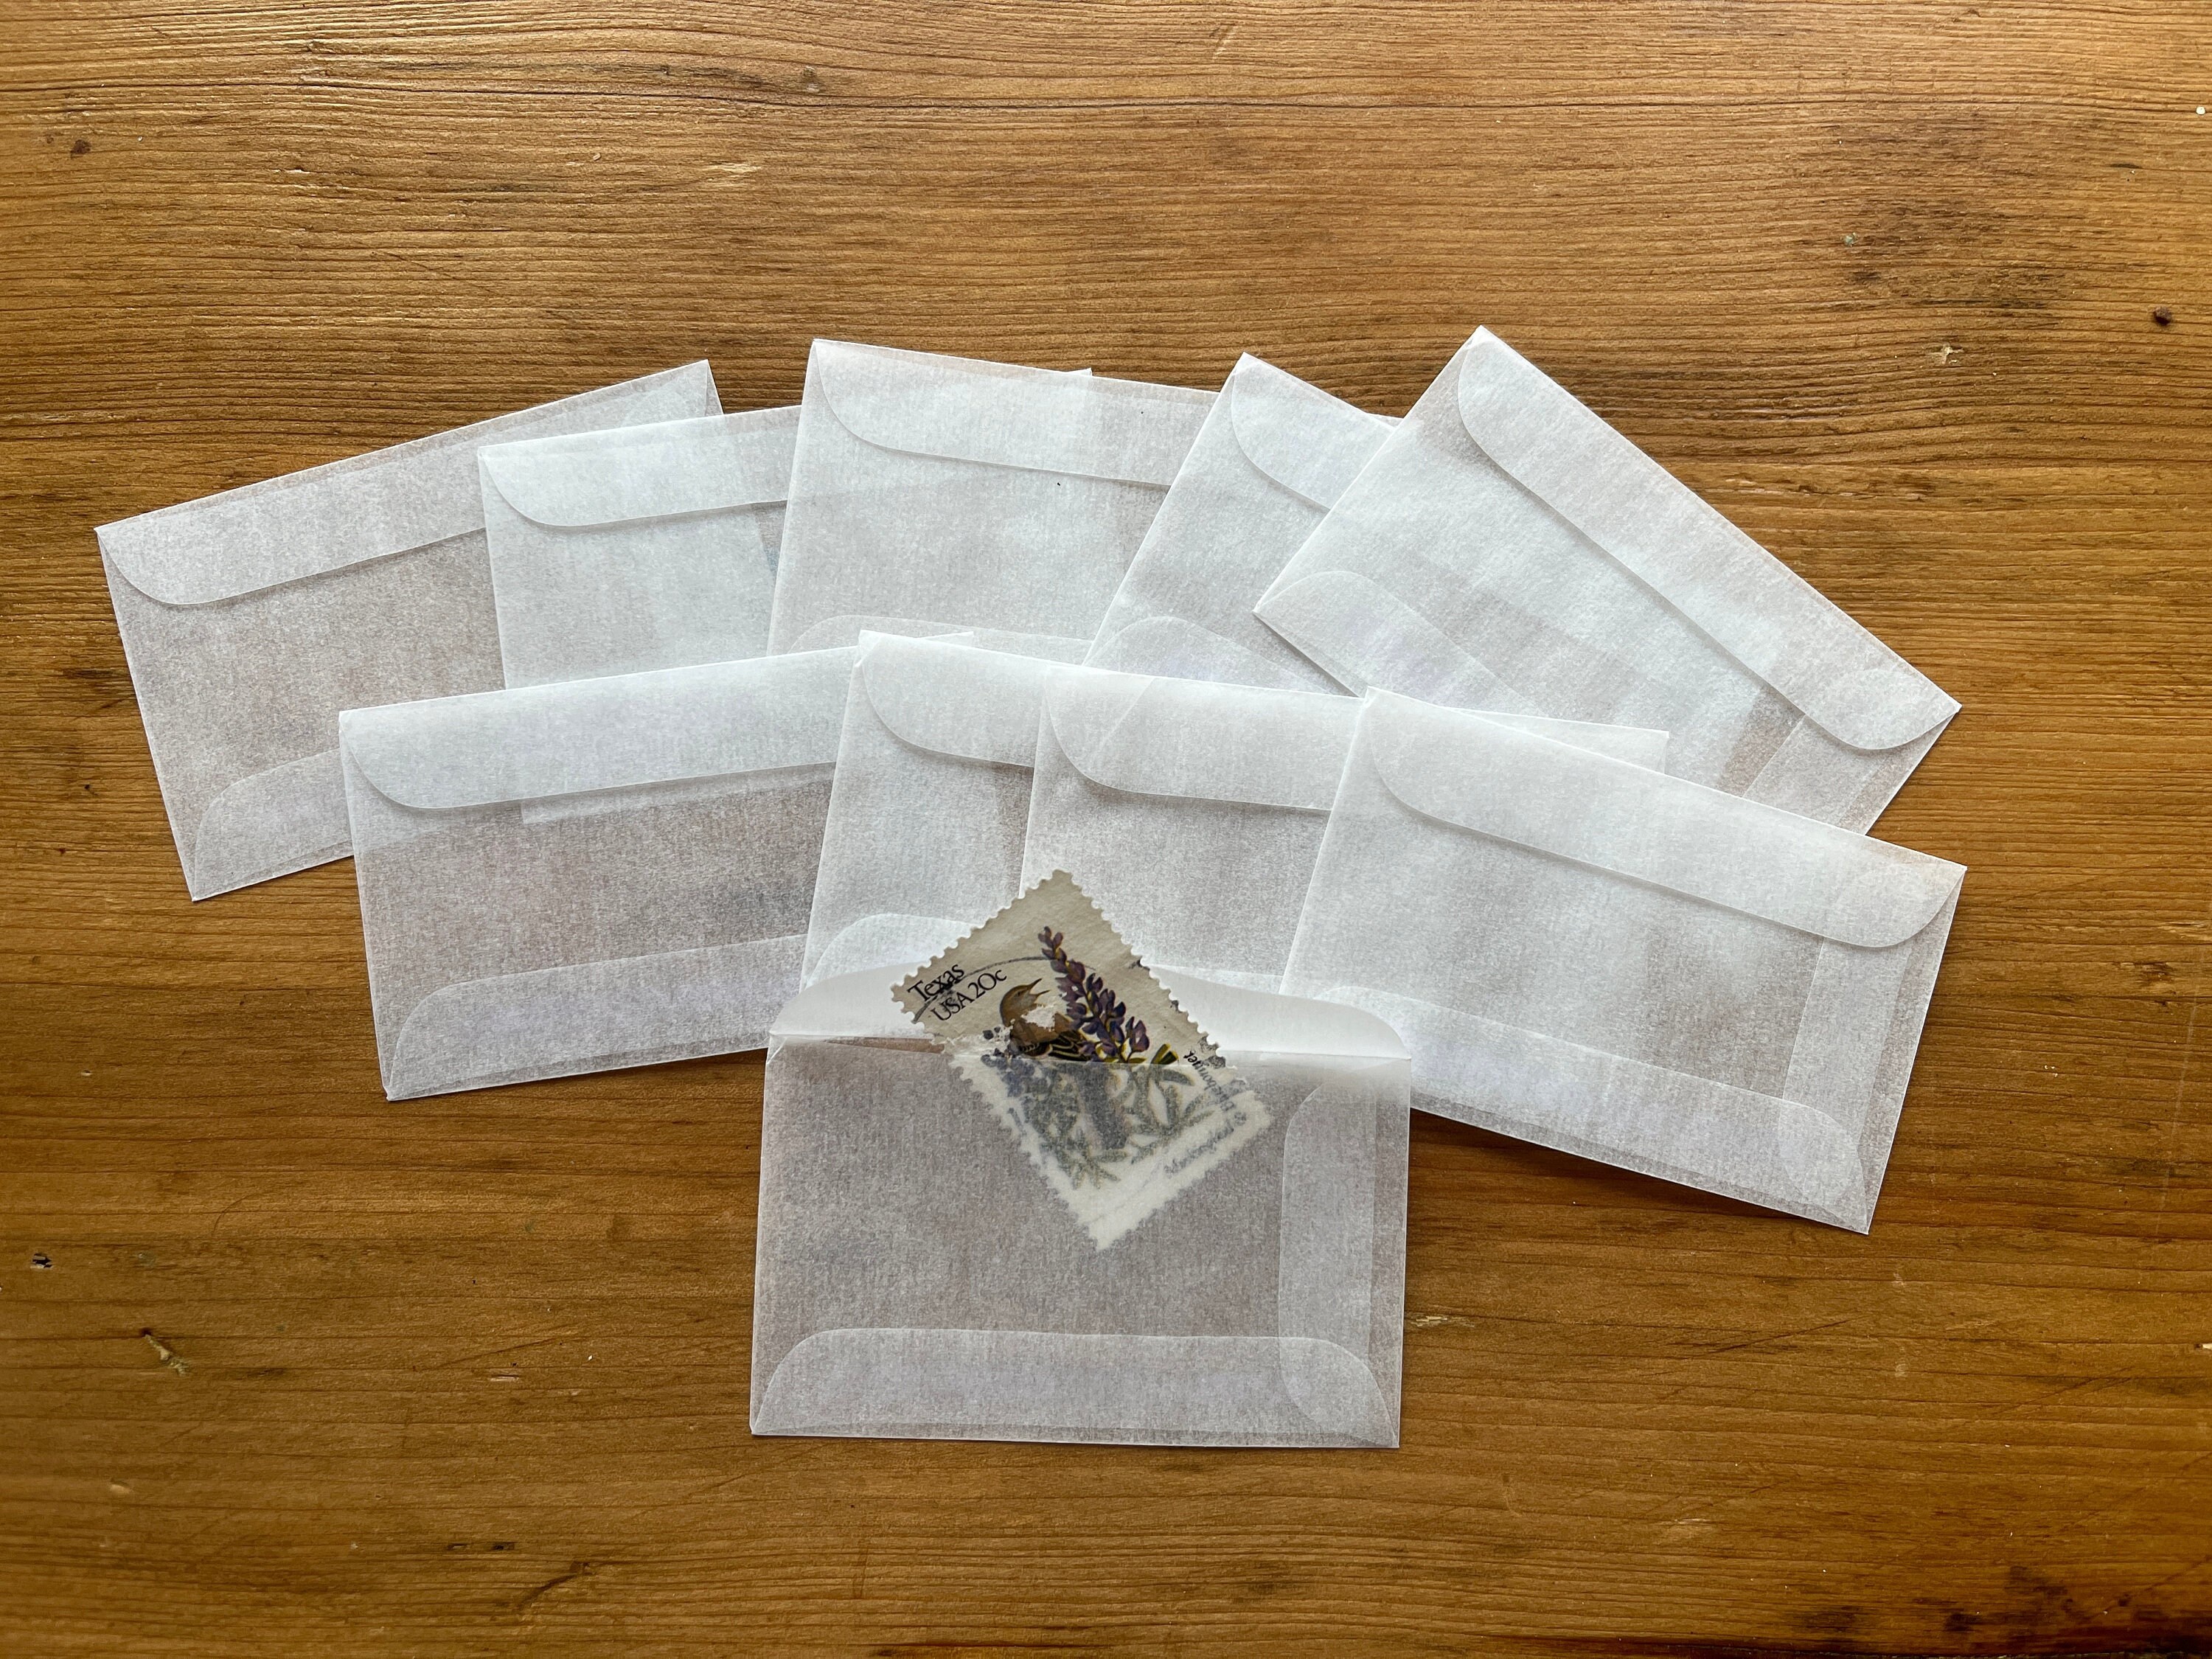 10 Very Small Glassine Envelopes 2 7/8 Inches Wide X 1 3/4 High for Small  Ephemera, Postage Stamps, Tea Cards Junk, Art Journal Pocket Tuck 